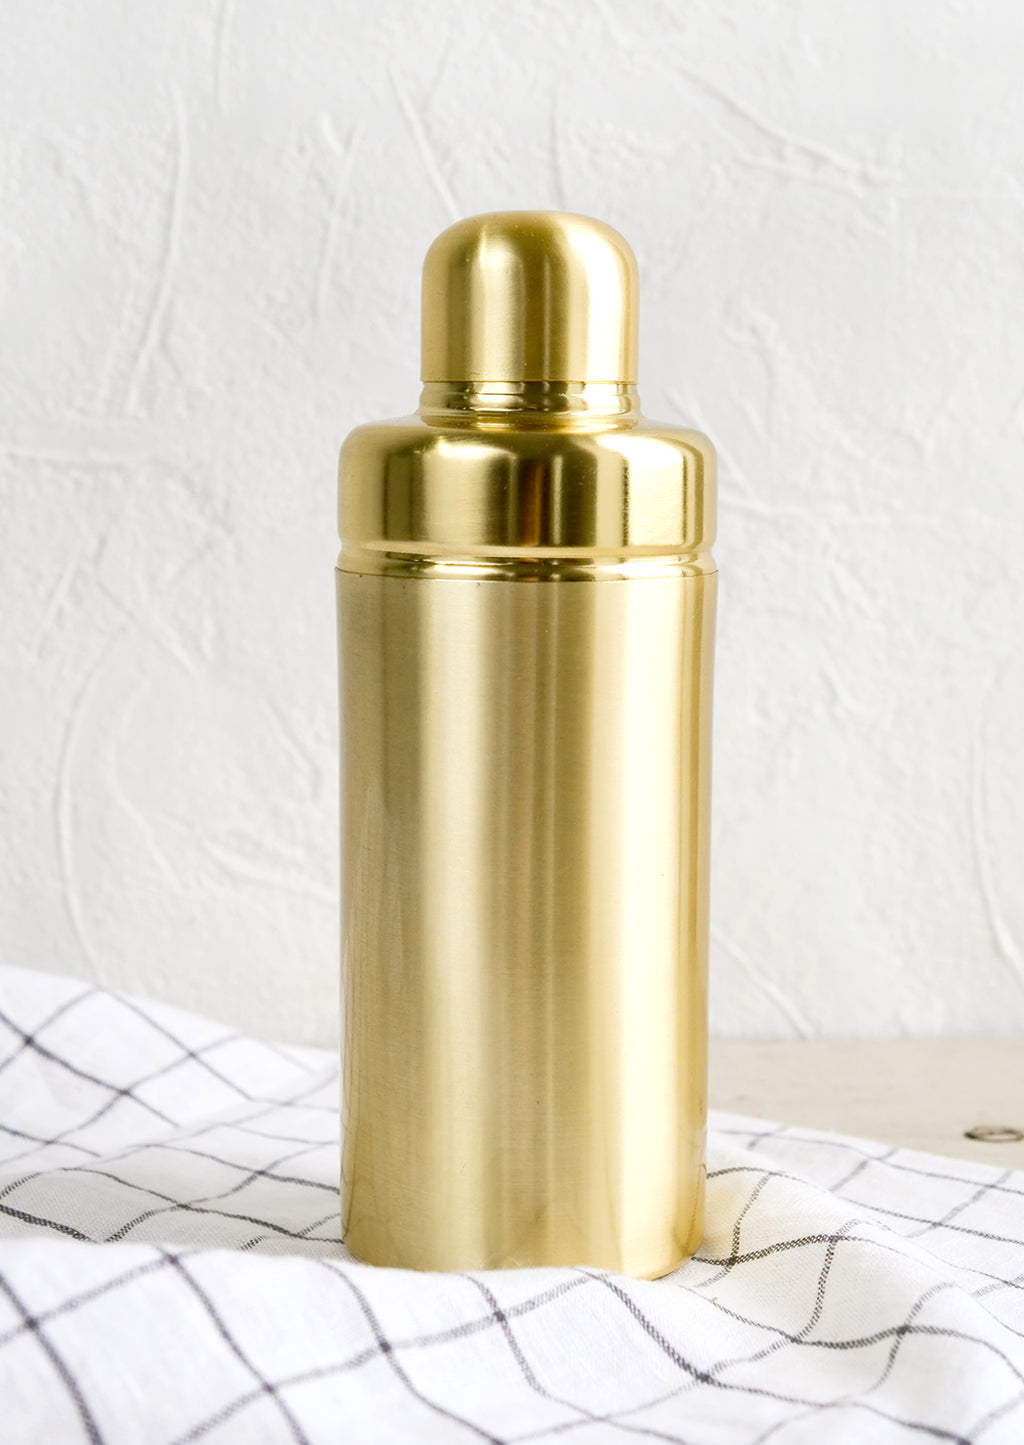 1: A cocktail shaker in satin gold metal.